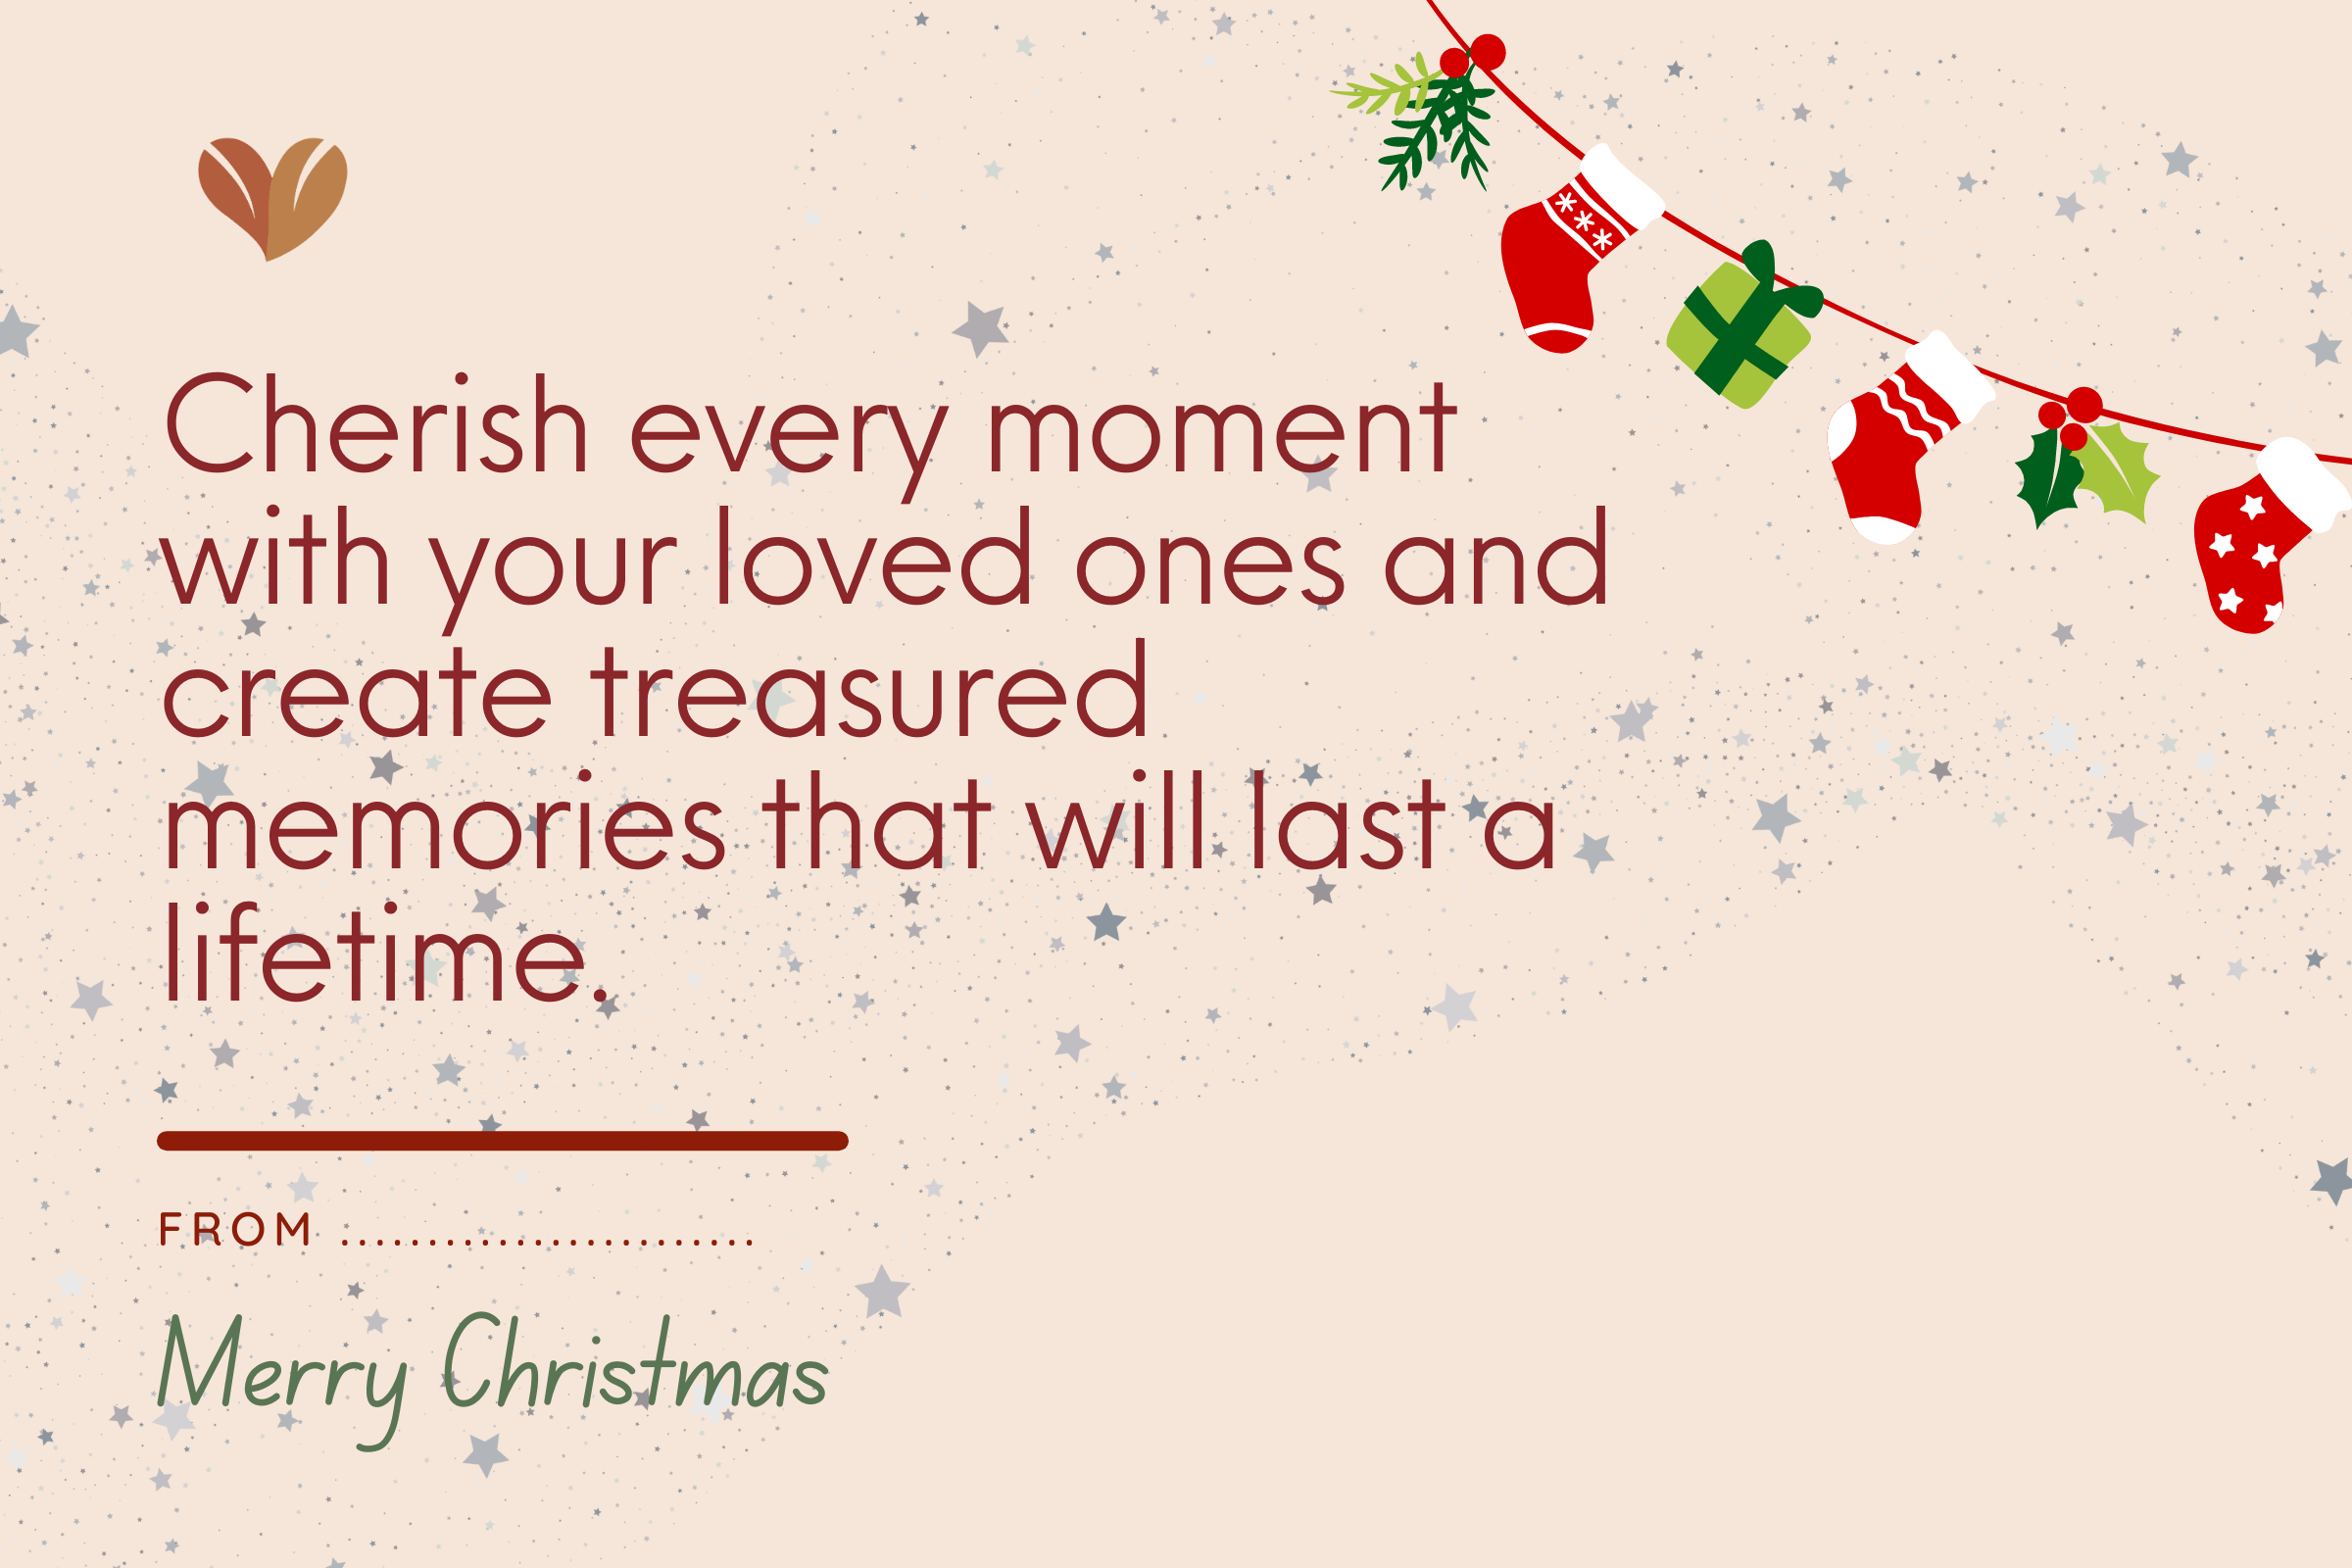 110 Christmas Card Sentiments: Thoughtful Ways to Spread Joy